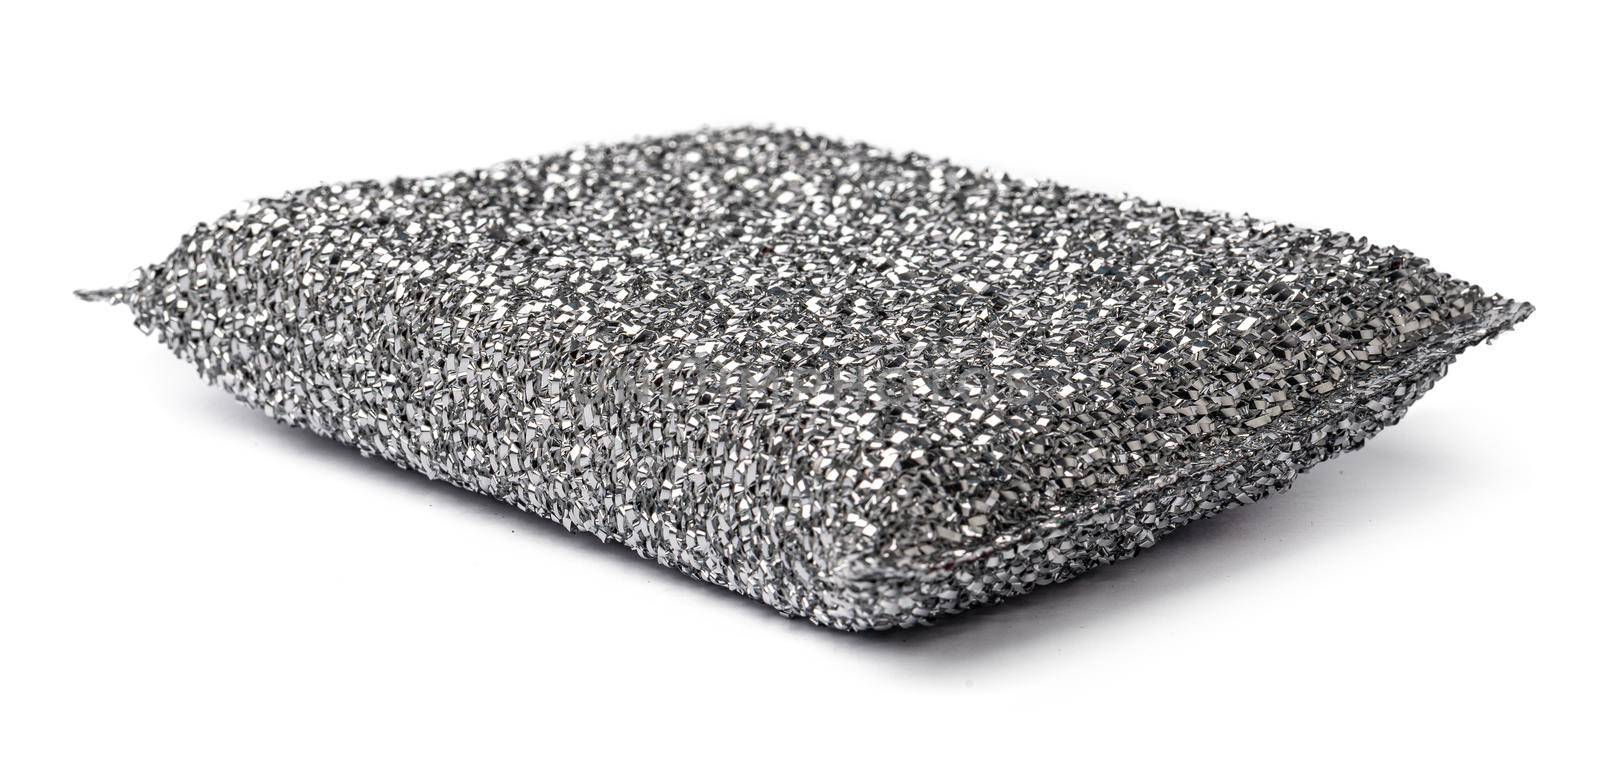 Metal sponge for washing dishes on a white background, close up